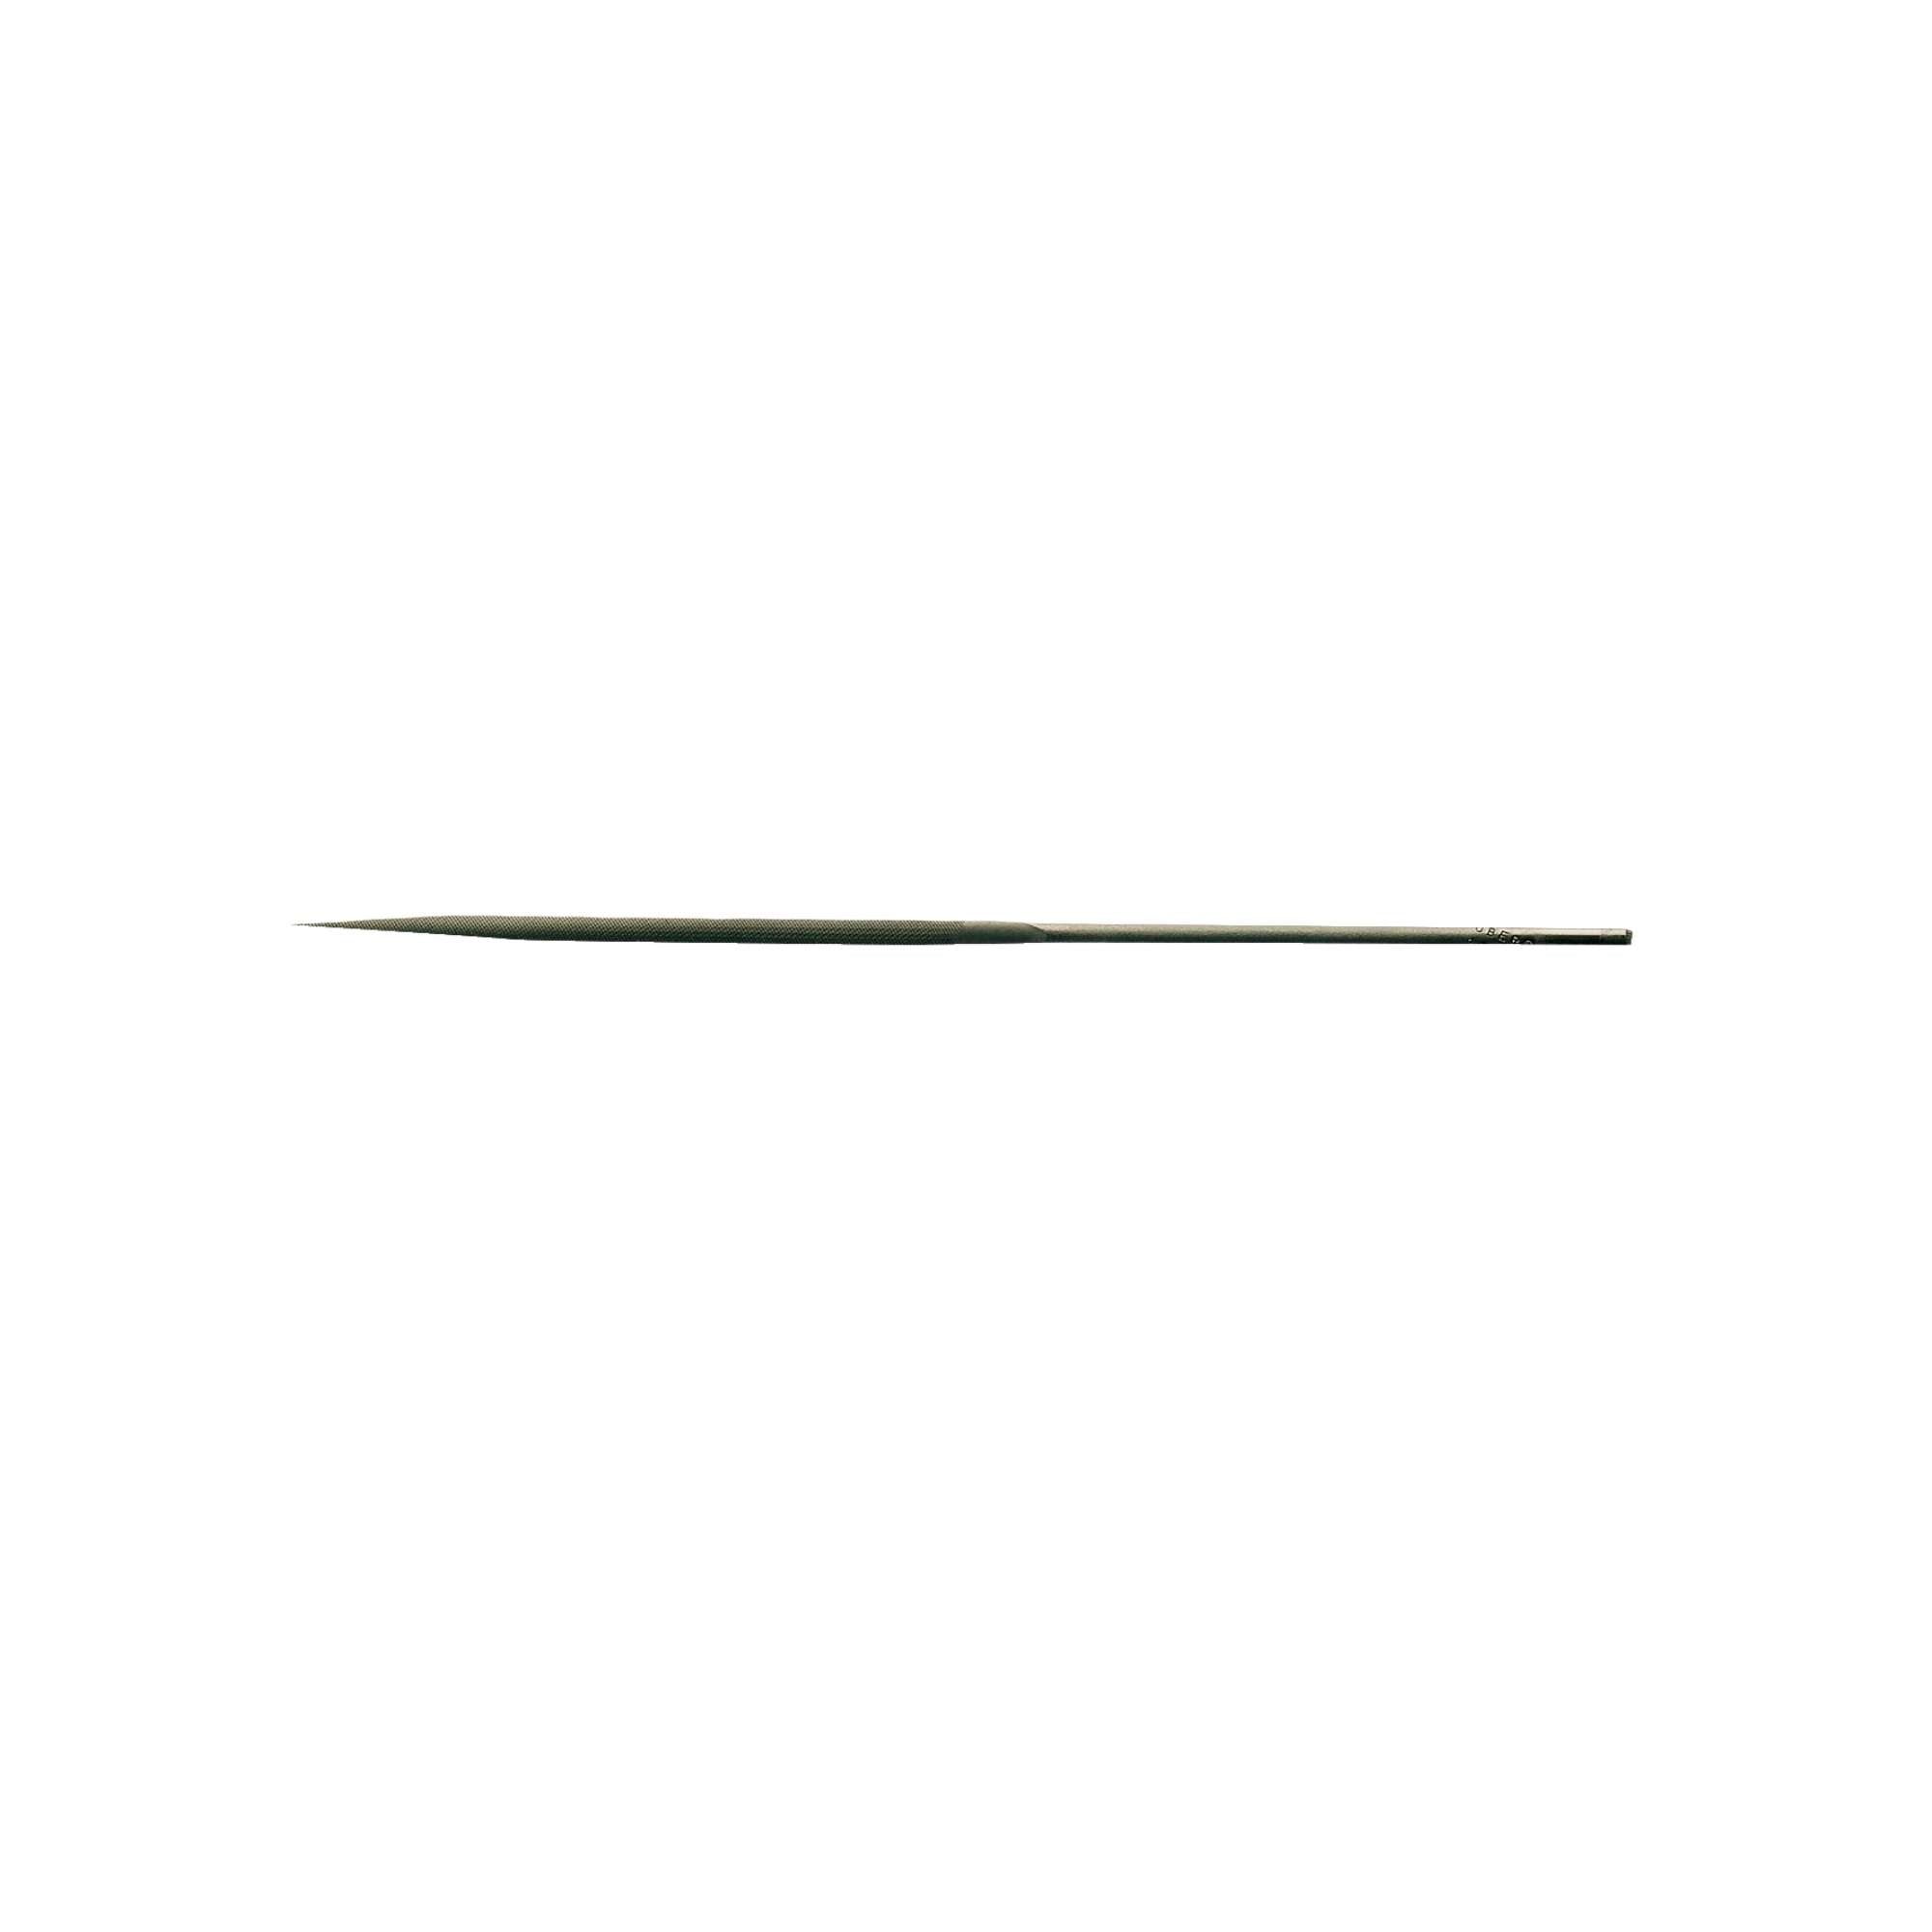 Oval Needle Oval cut half-sweet file for trimming - Bahco 2-305-16-1-0